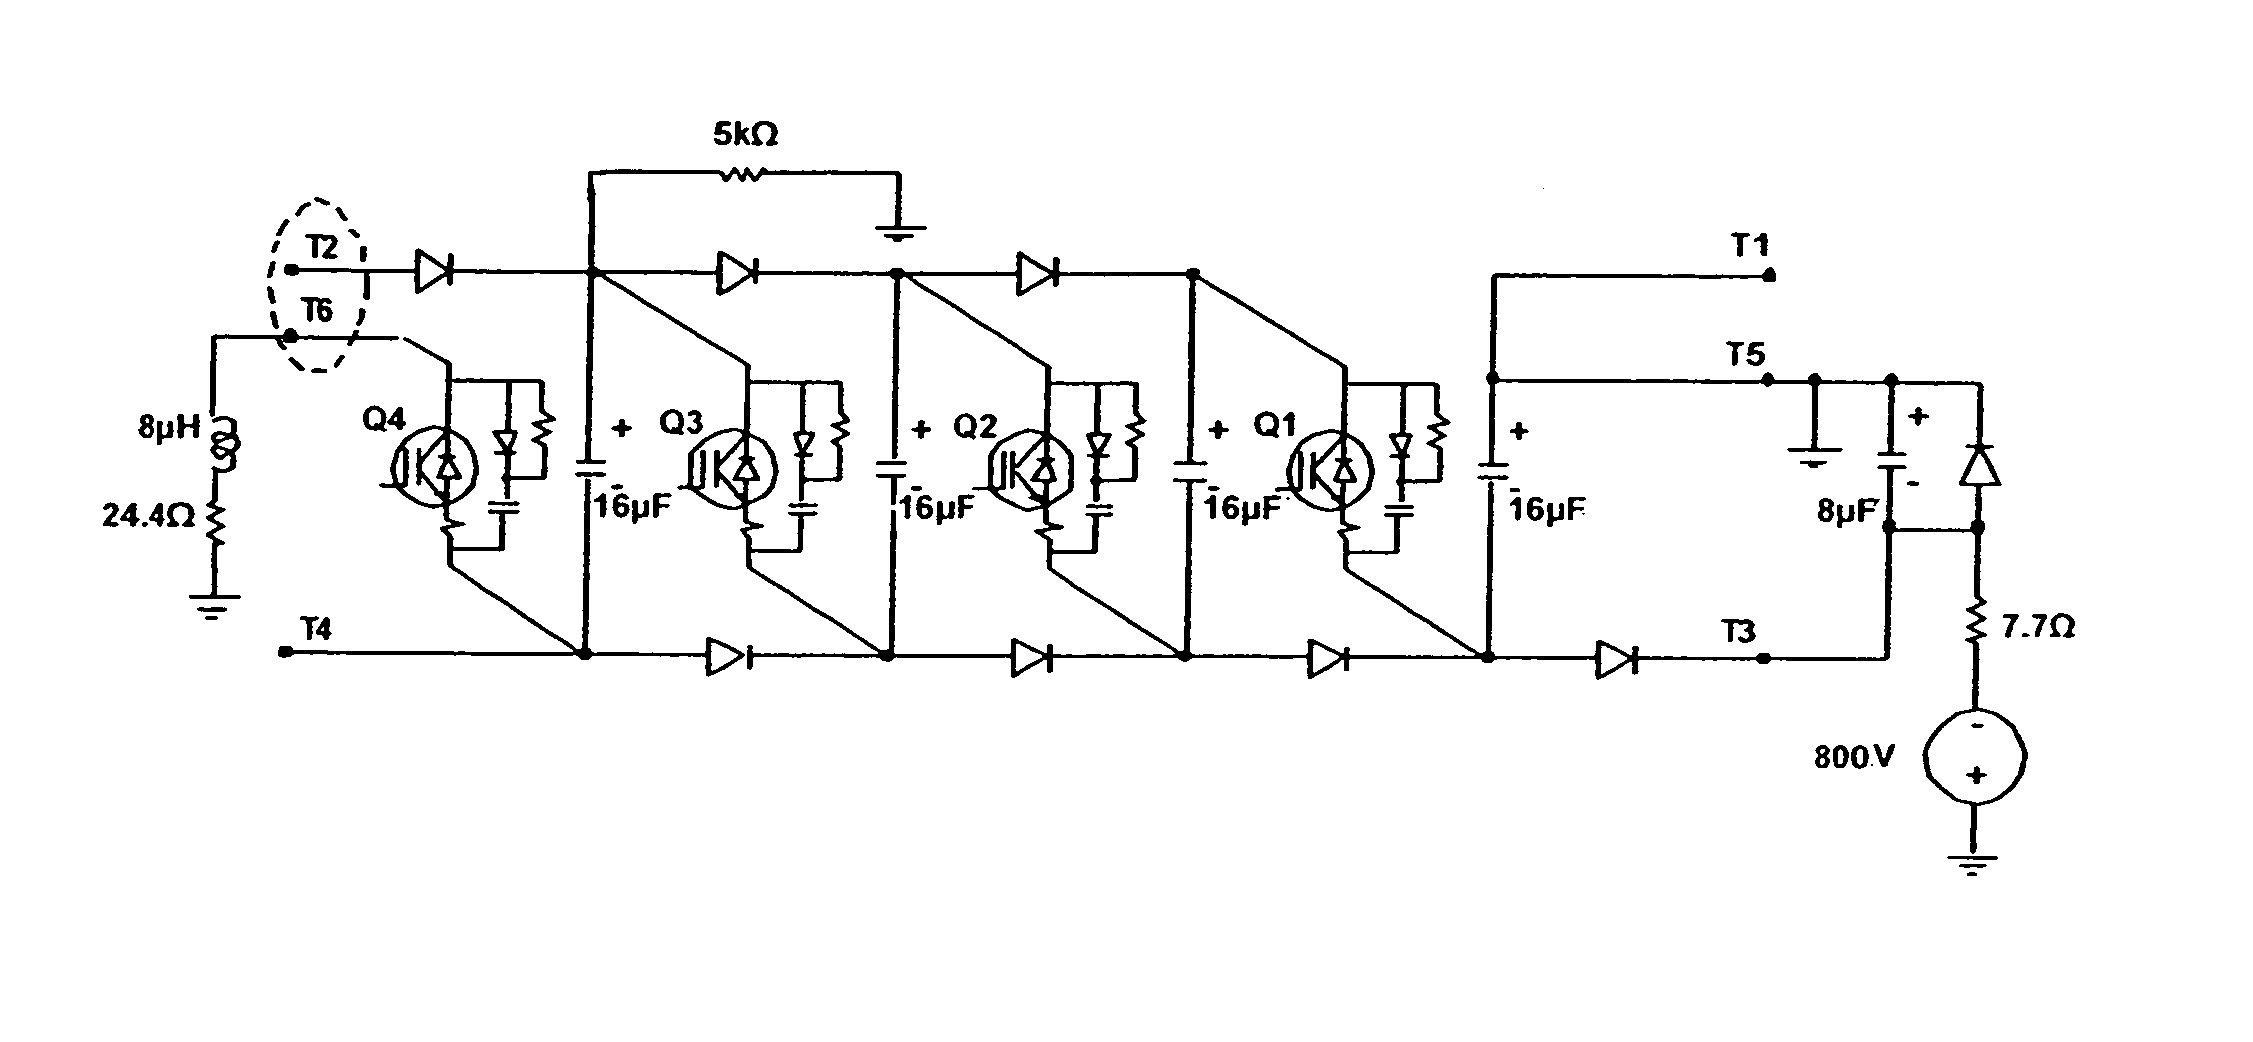 Apparatus for producing voltage and current pulses